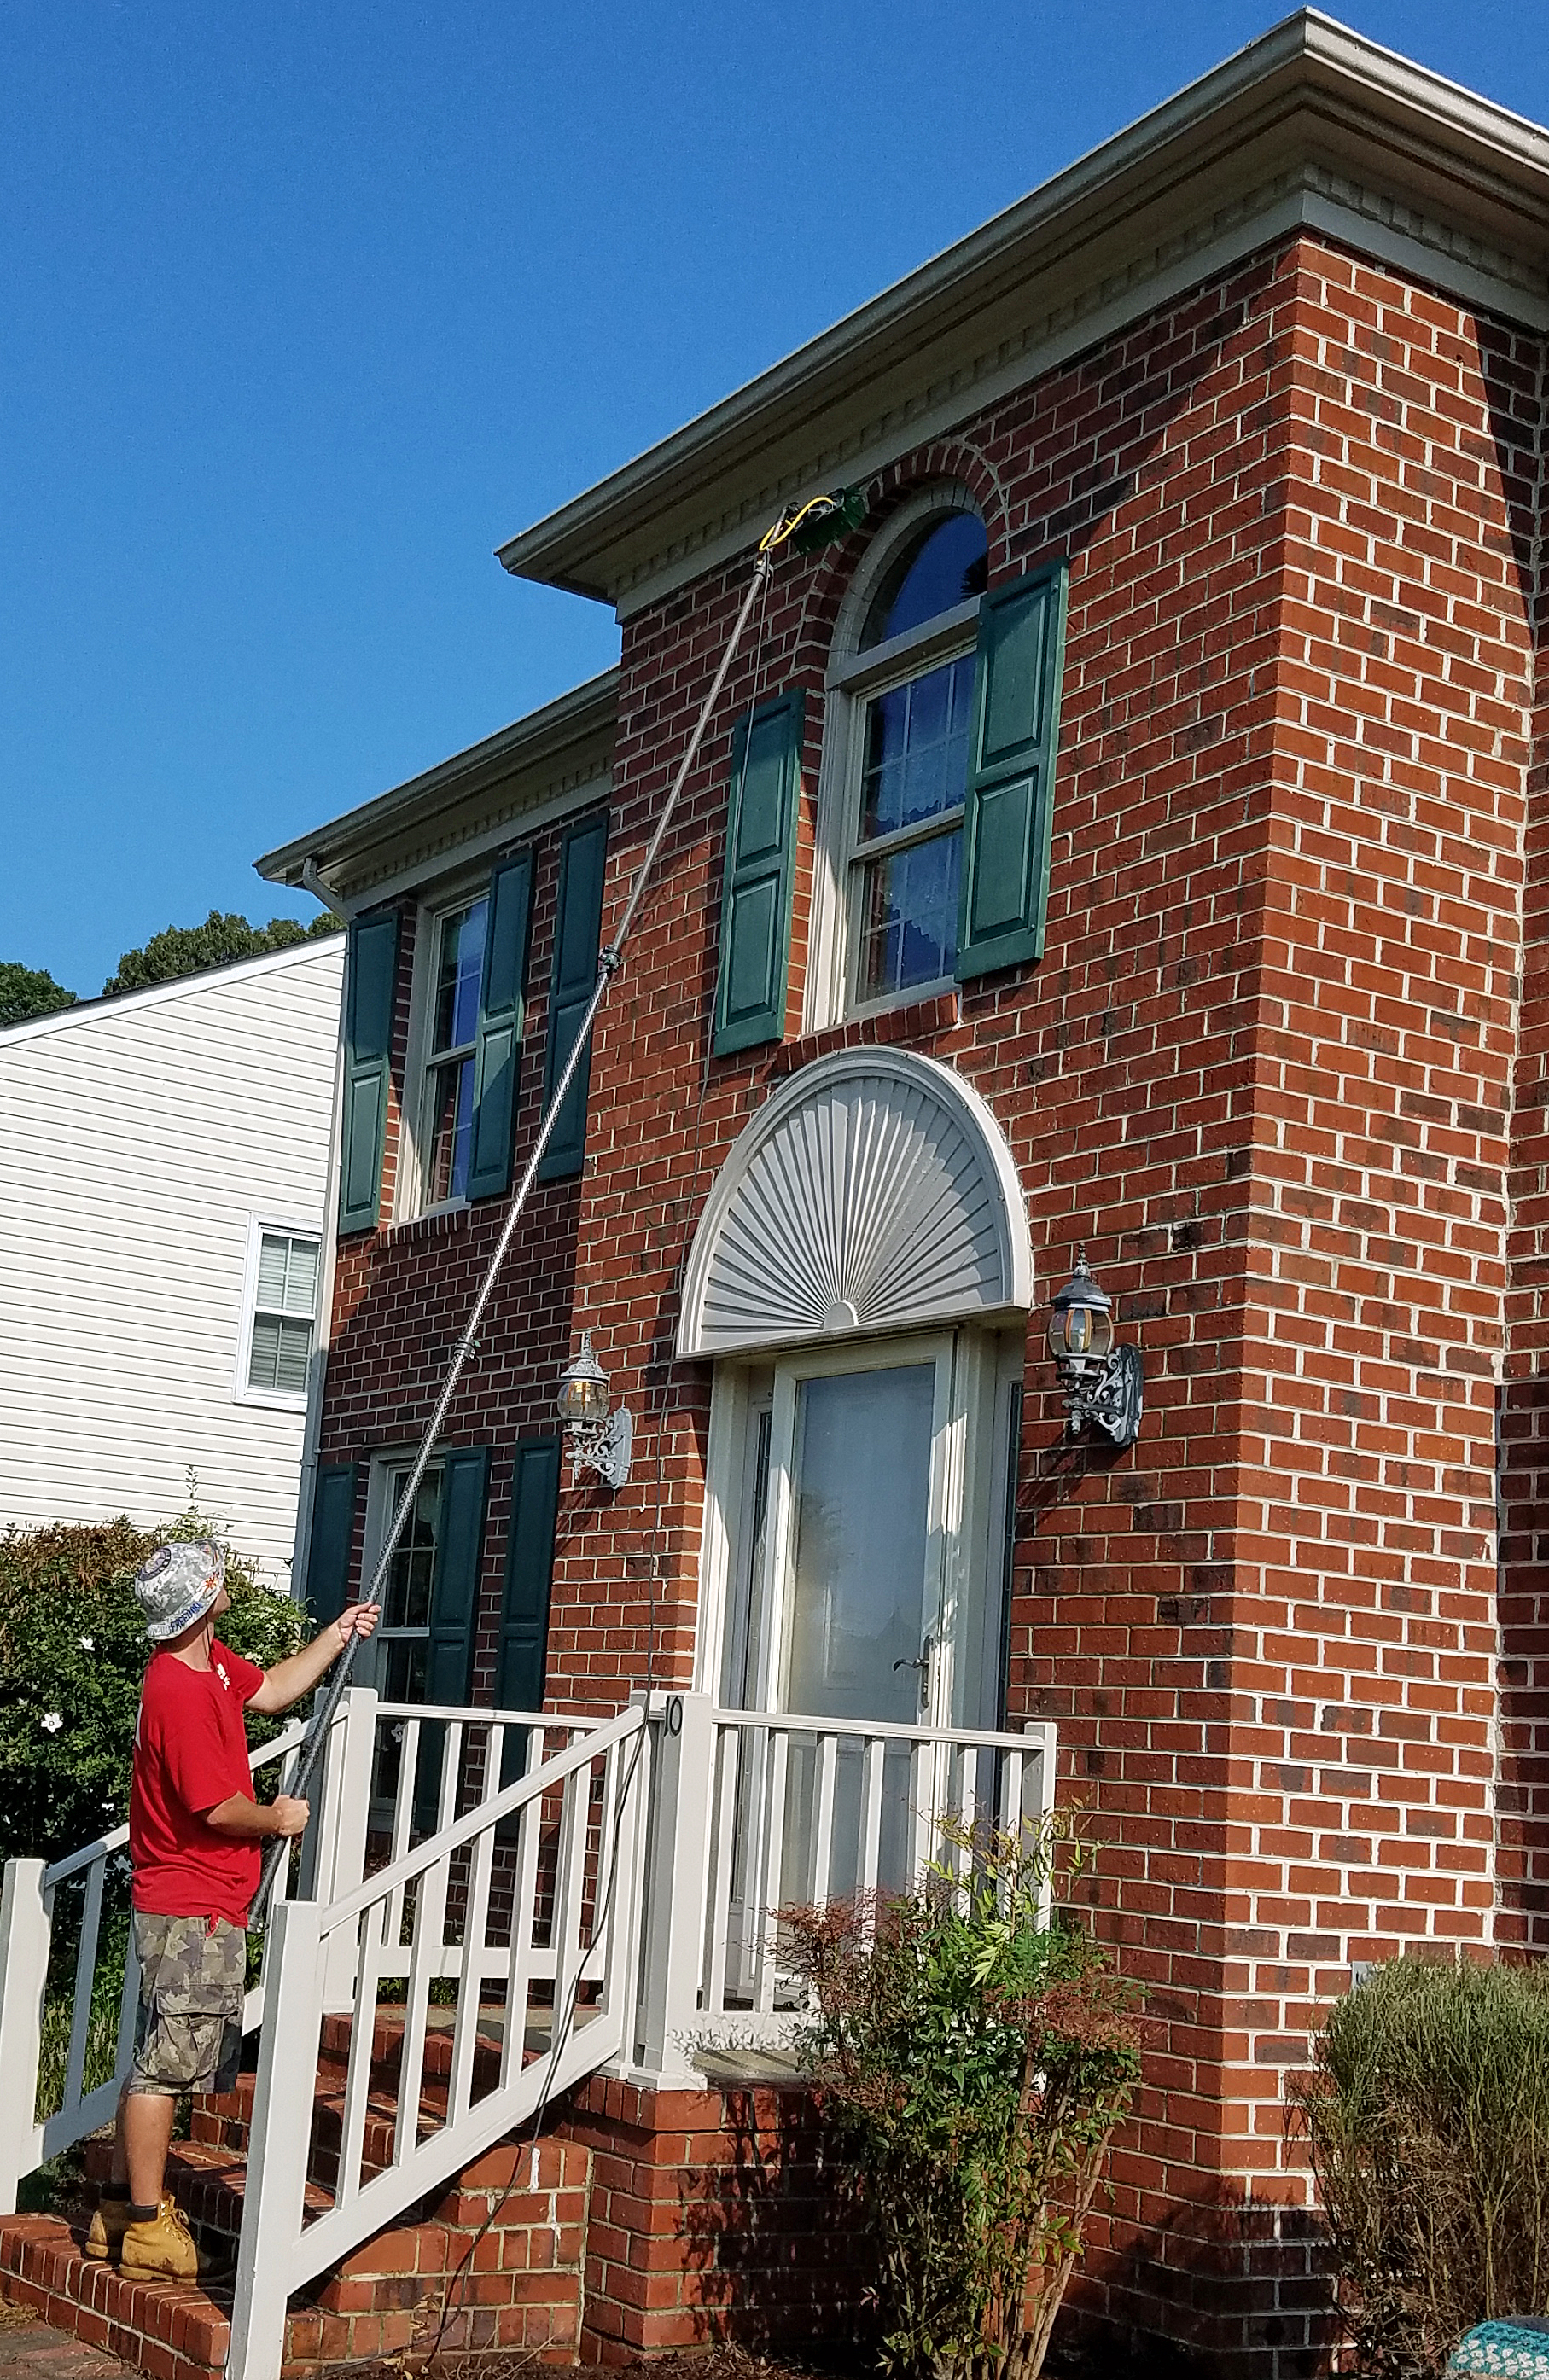 Fish Window Cleaner Cleaning 2nd Story Foyer Window with a Water-Fed Pole